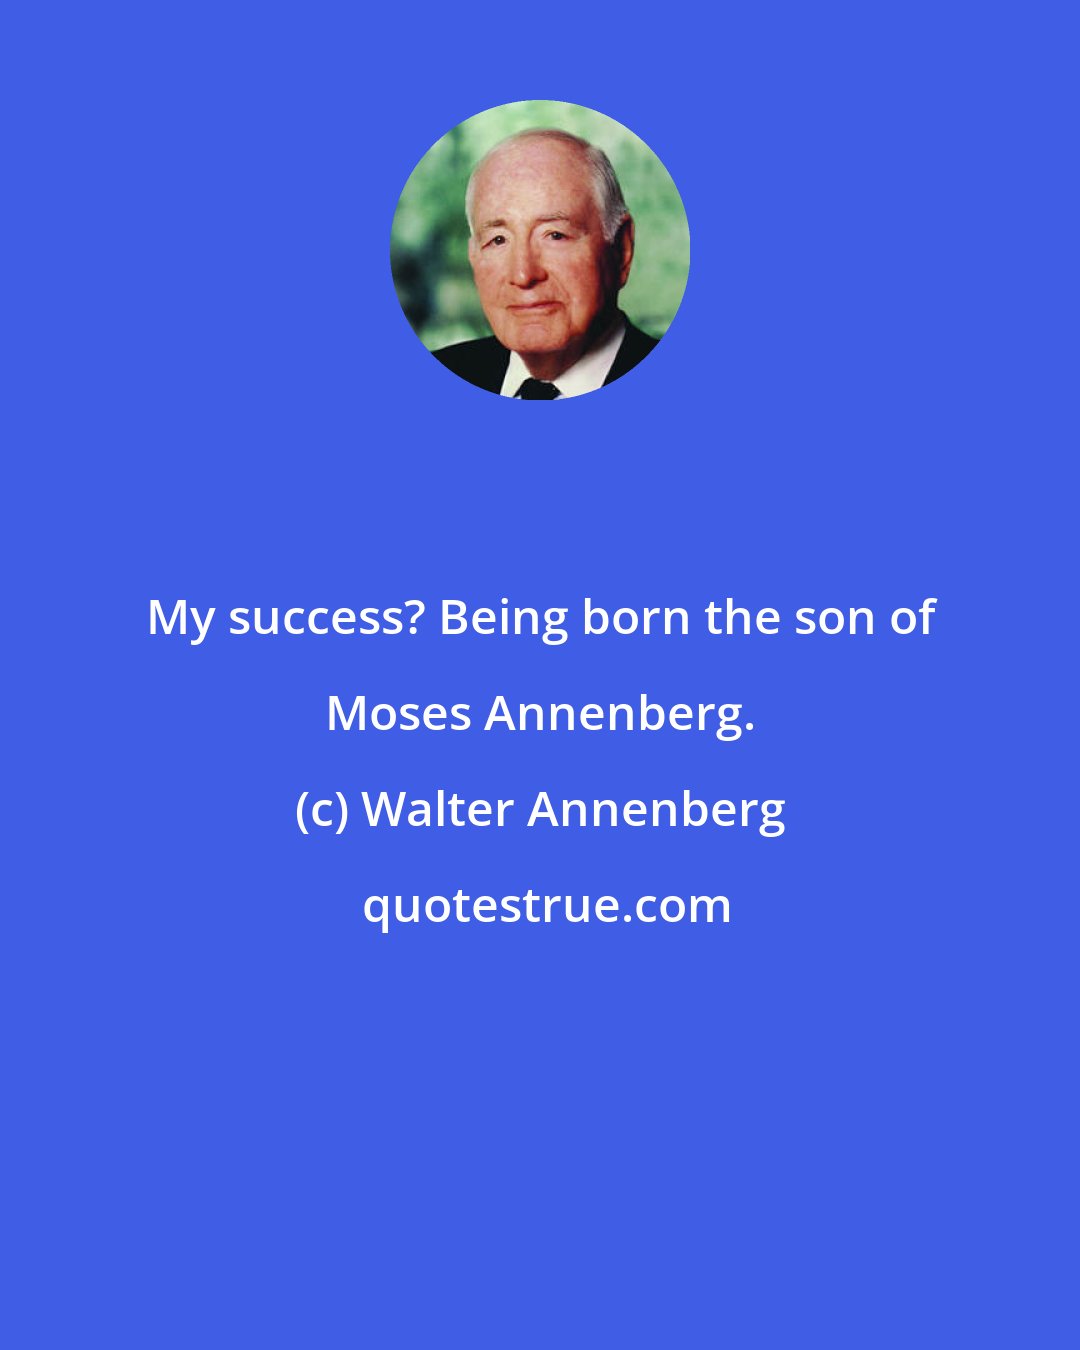 Walter Annenberg: My success? Being born the son of Moses Annenberg.